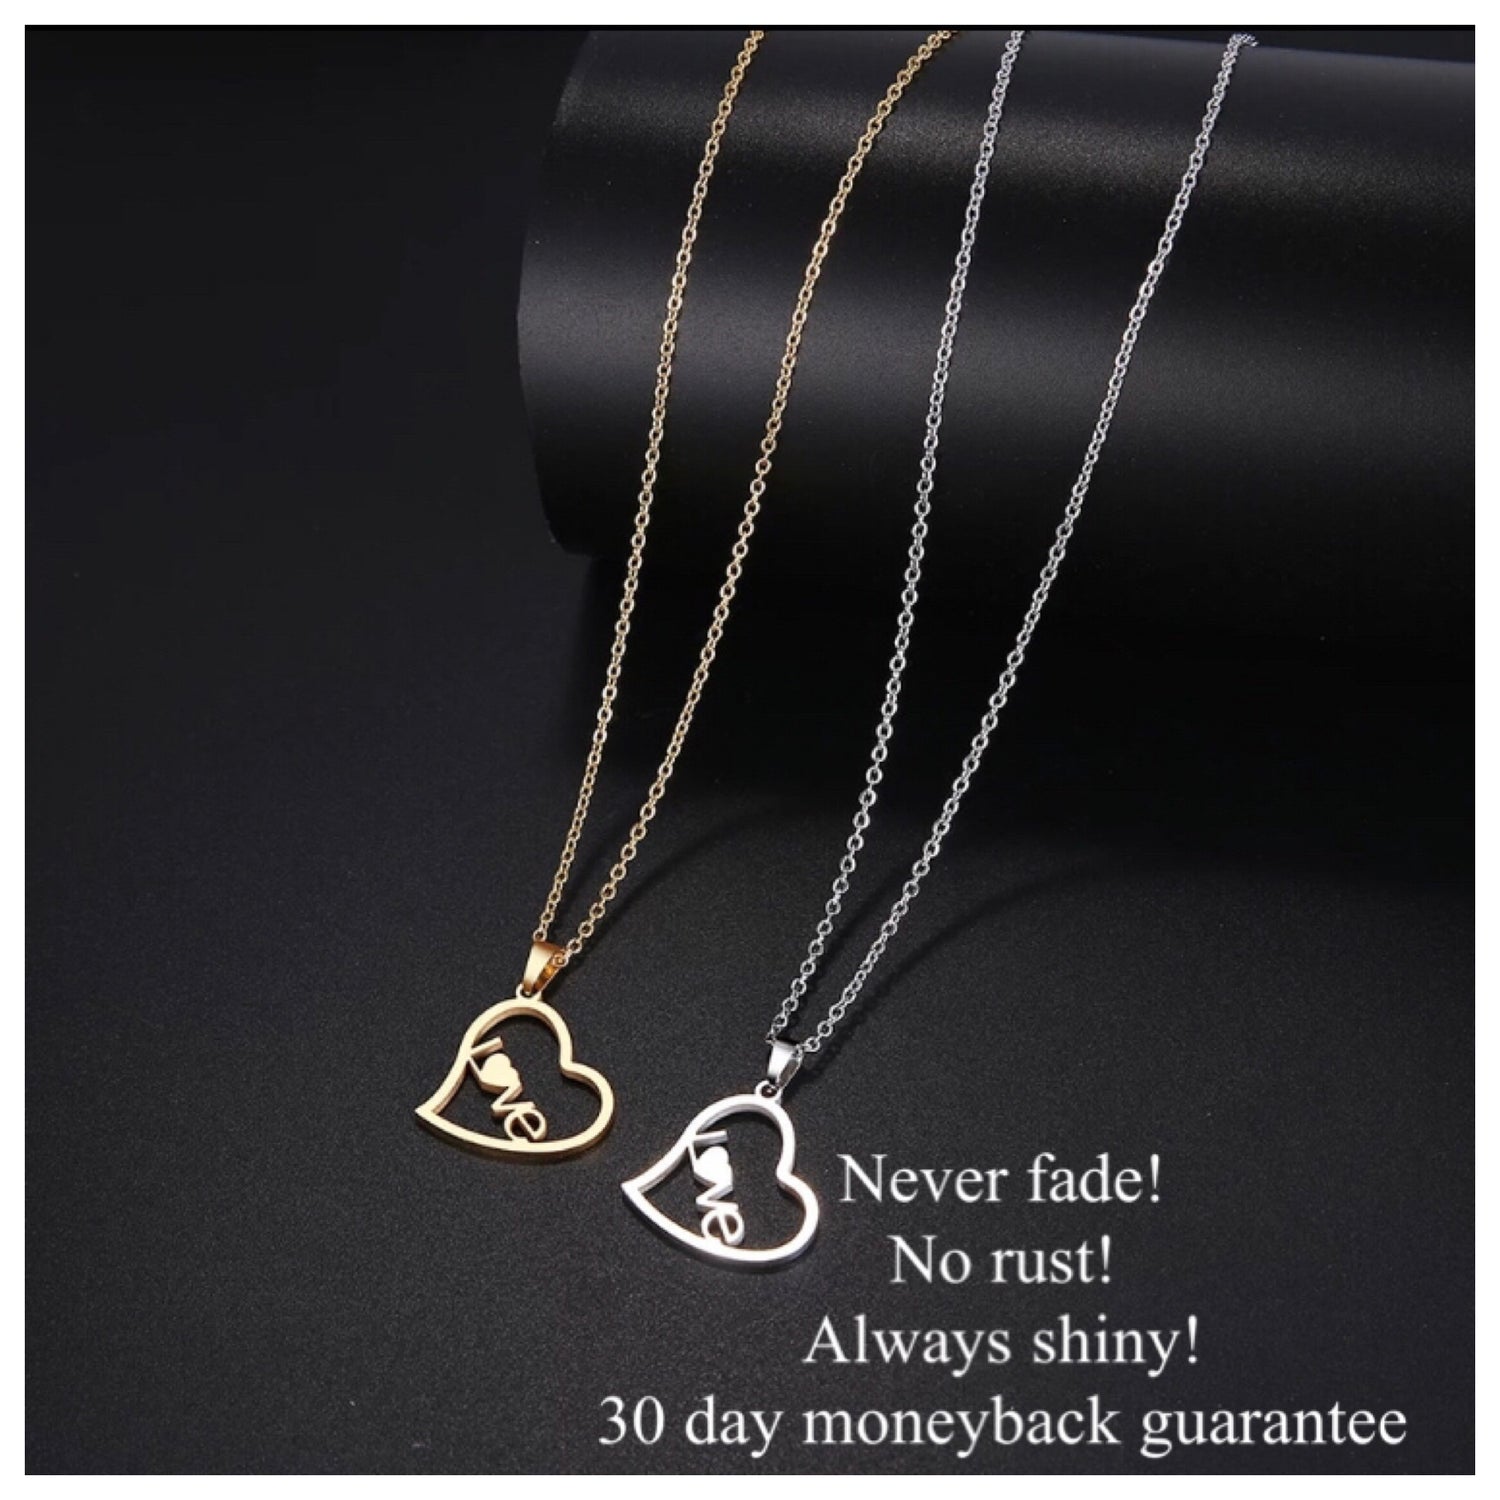 Heart pendant necklace non tarnish high quality charm gift jewelry